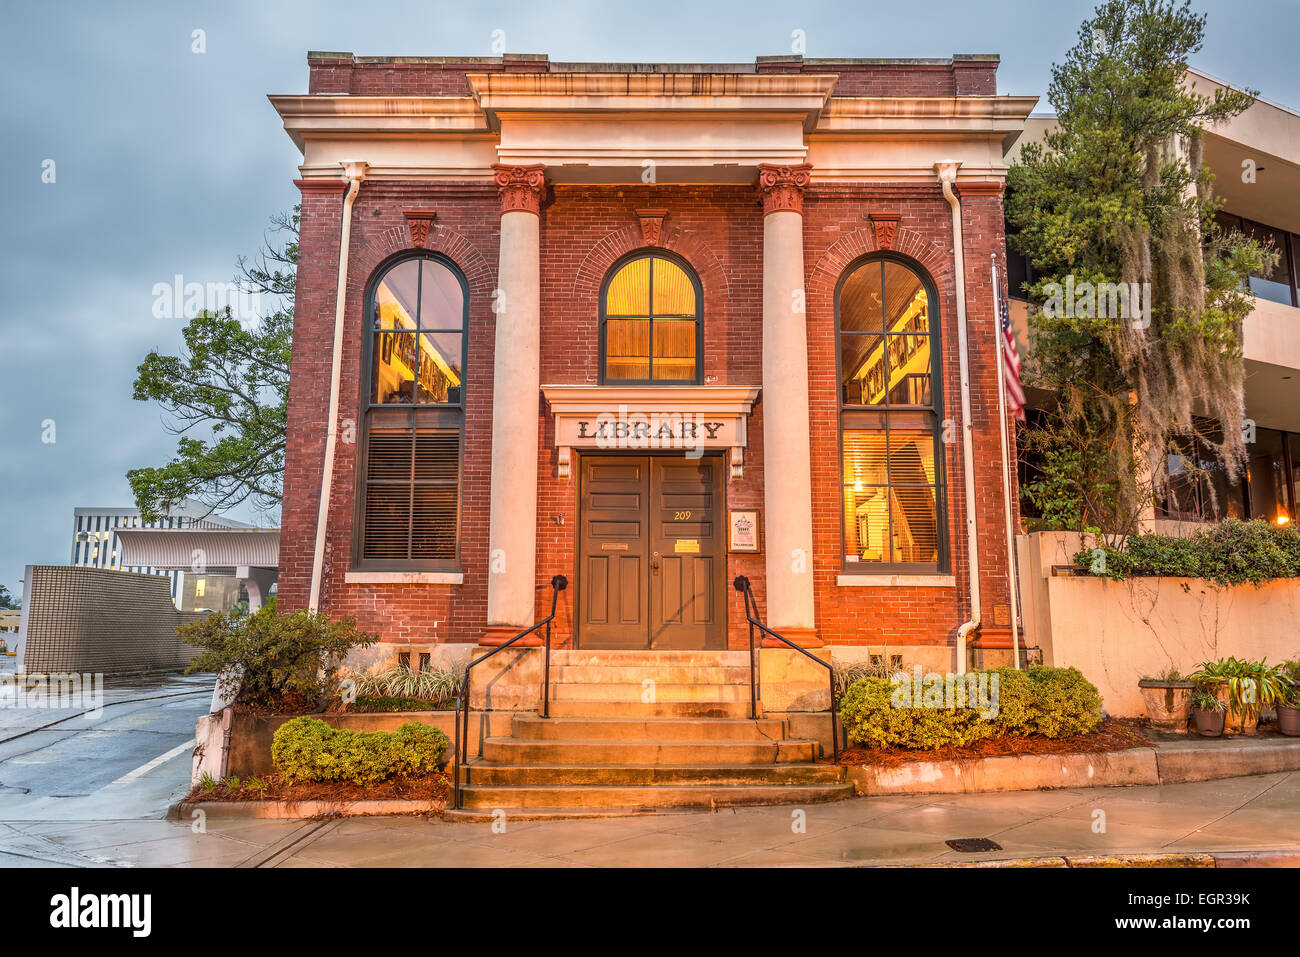 David S. Walker Library (also known as The University Library) in Tallahassee, Florida Stock Photo